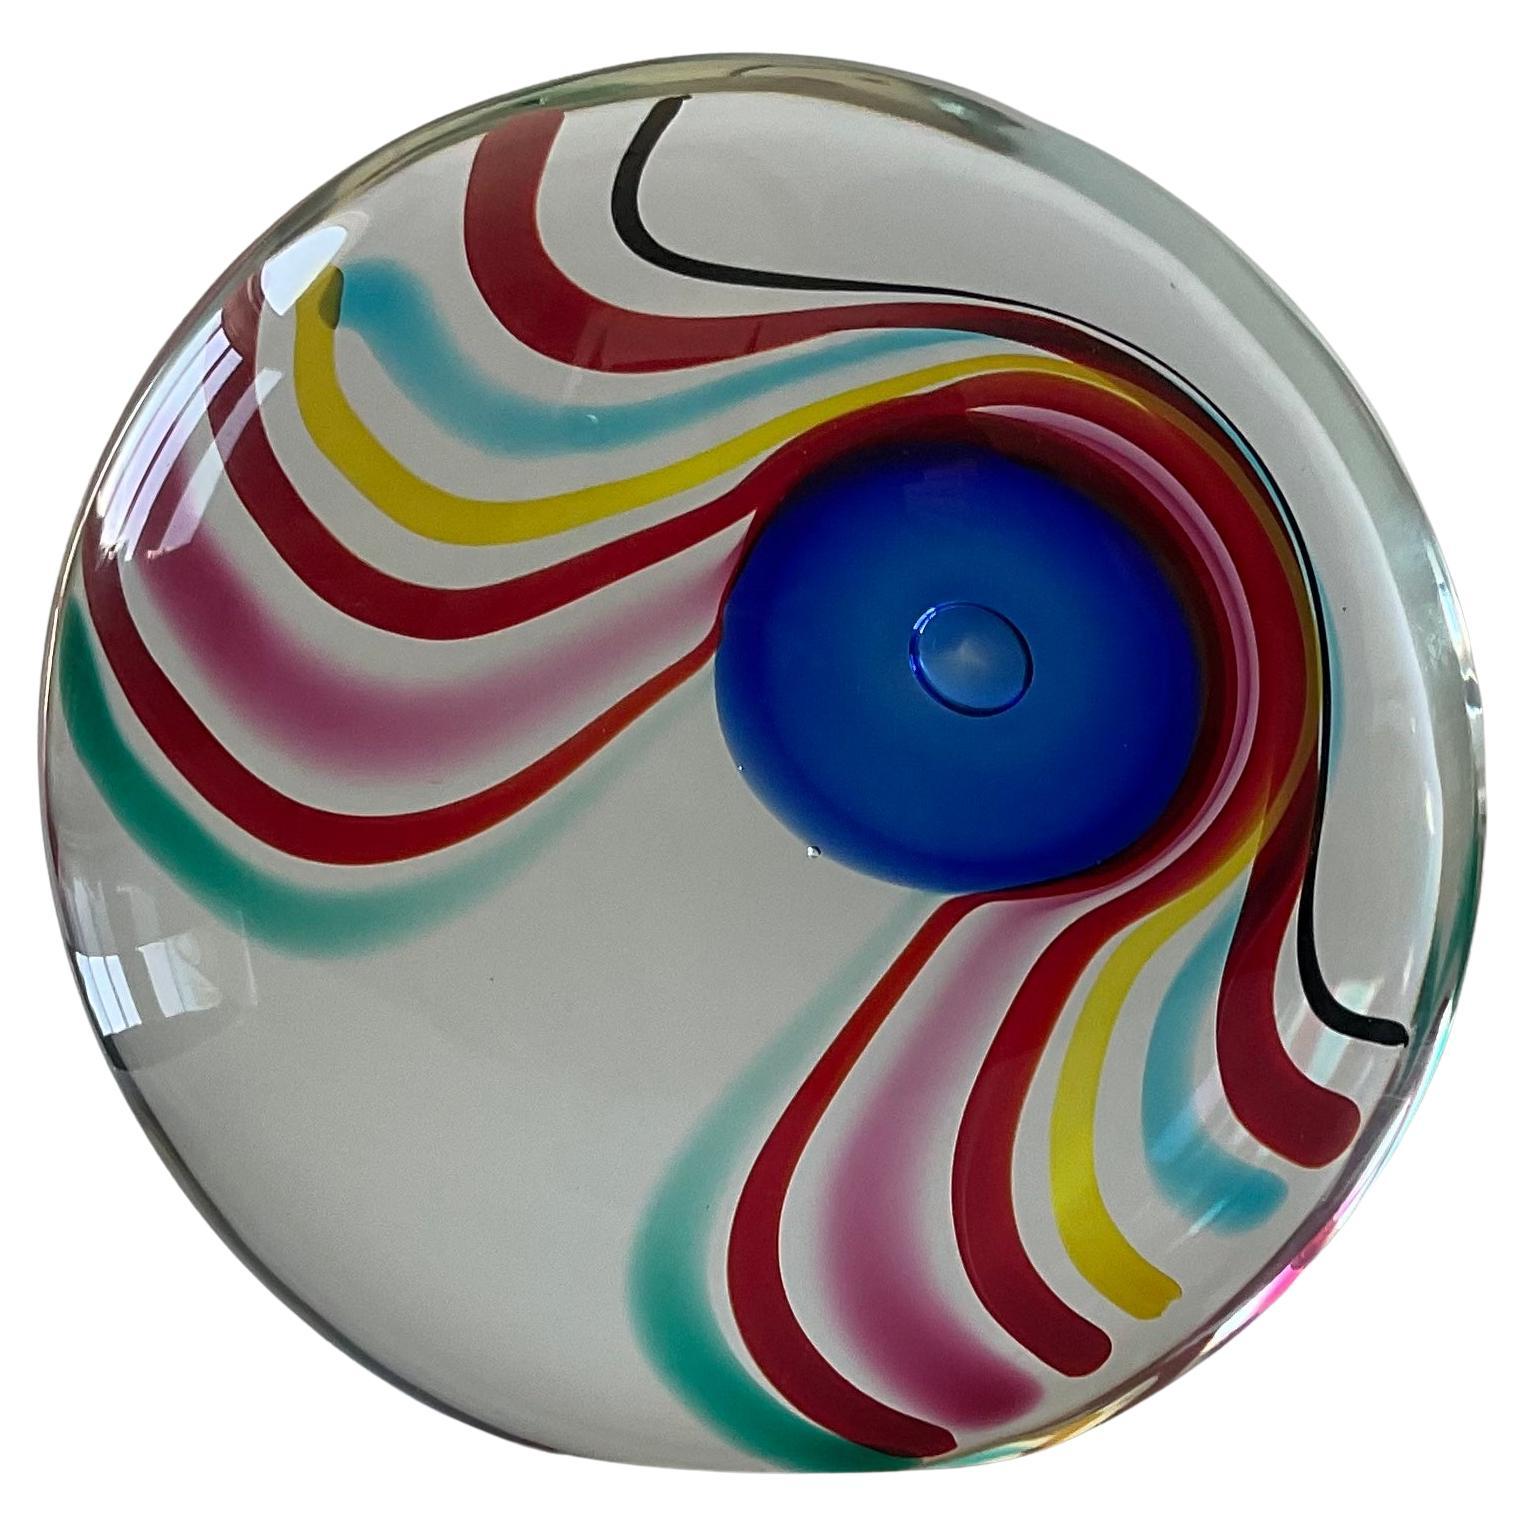 https://a.1stdibscdn.com/large-seguso-arte-vetro-signed-striped-murano-glass-abstract-sculpture-heavy-for-sale/f_66412/f_336265521680538226306/f_33626552_1680538226855_bg_processed.jpg